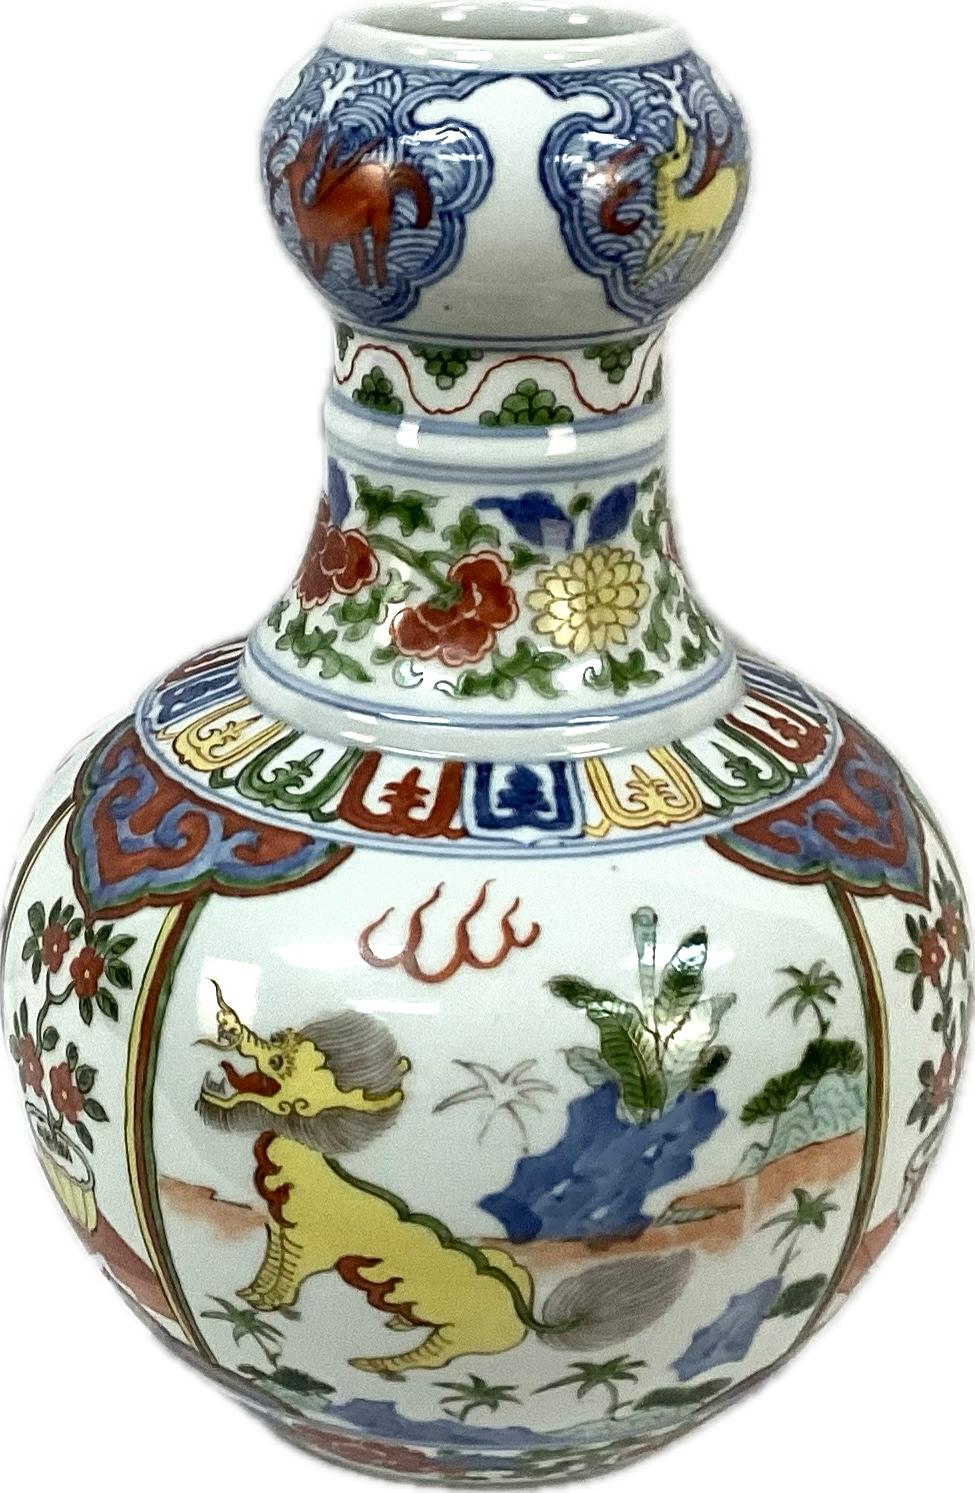  Chinese Gourd Shaped Porcelain Dragon Vase in rich colors of red, blue, green and yellow on a white background. Features multicolored dragons with flora and flowers. Chinese markings on bottom. In very good condition.